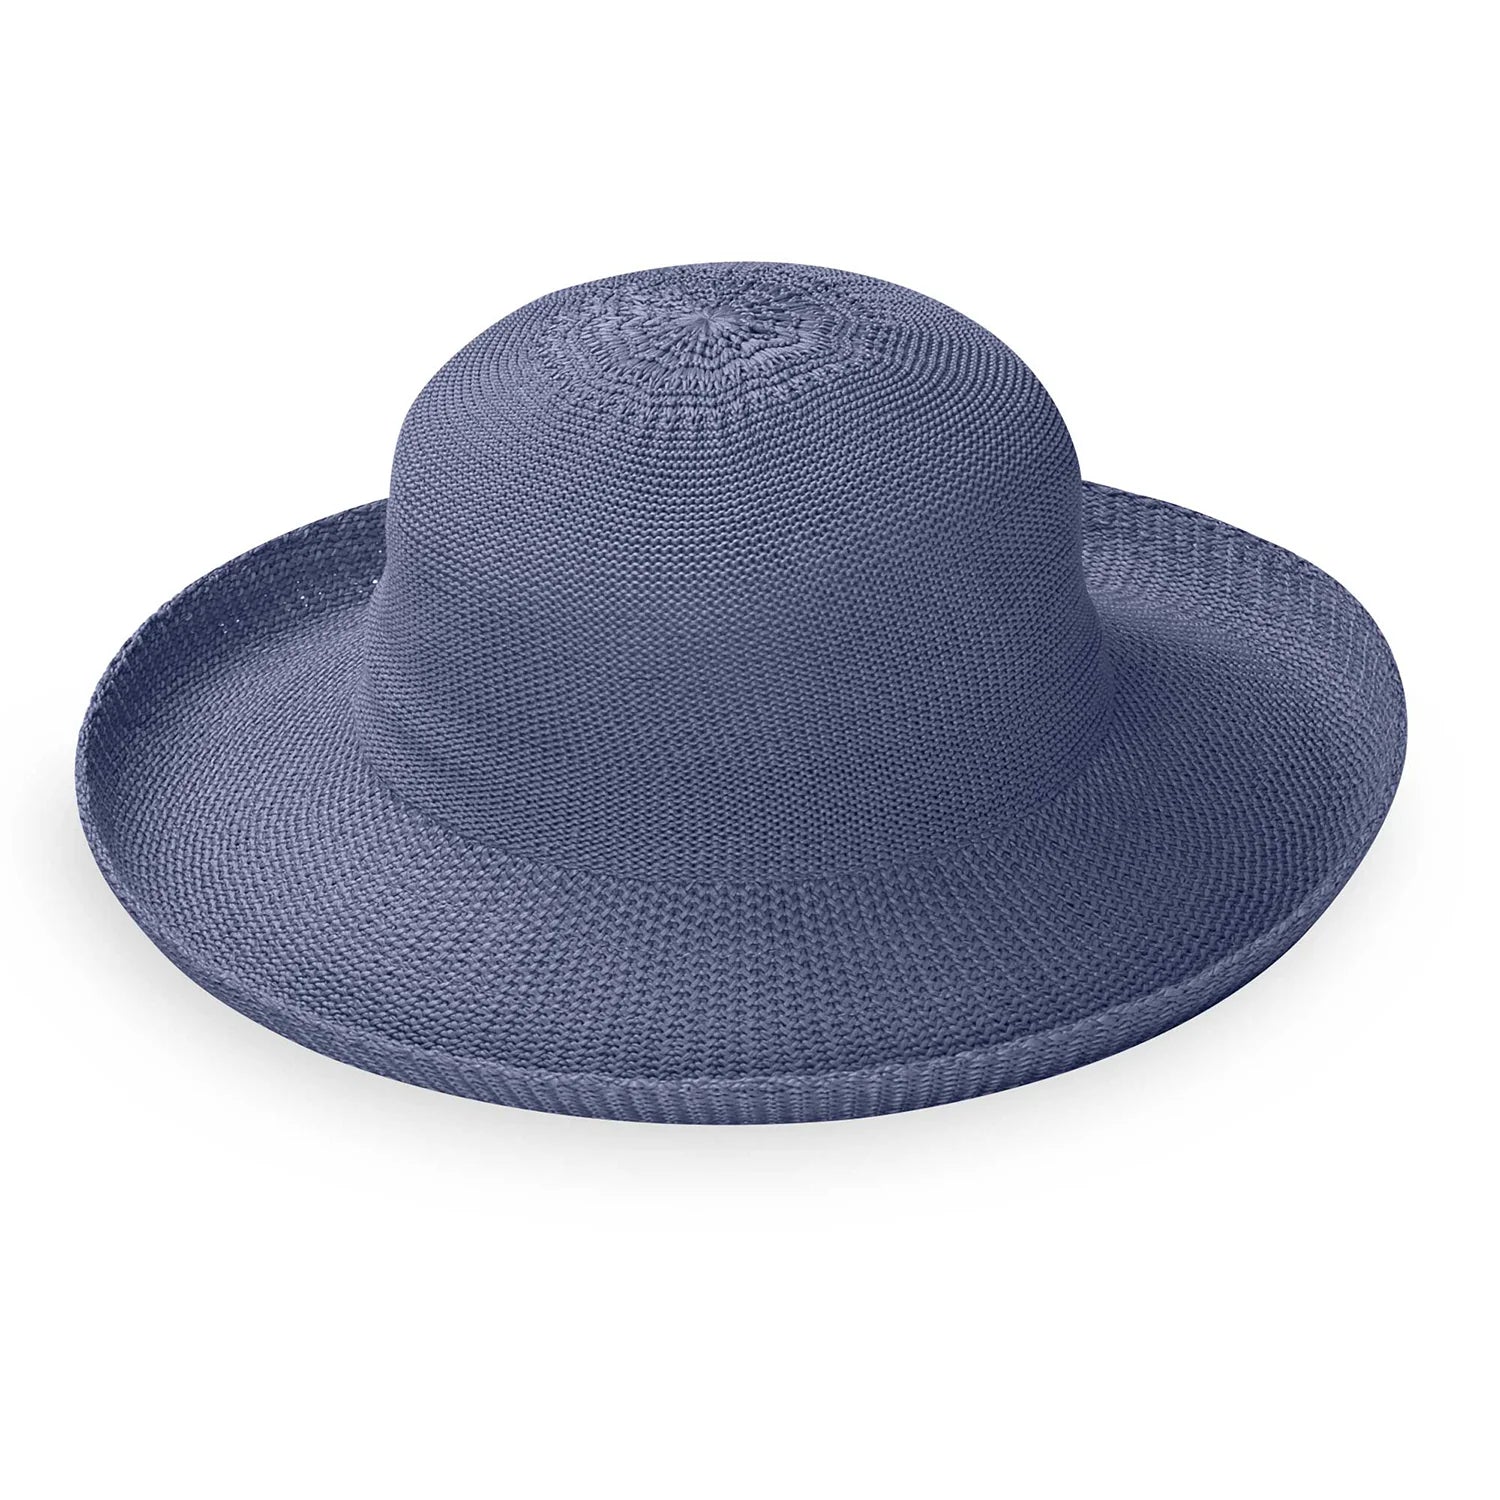 The straw hat goes modern. Made from ultra-lightweight poly-straw, the Victoria keeps you cool and comfortable through a round of golf or a day of sailing. Make the women's Victoria straw hat your go-to travel companion.